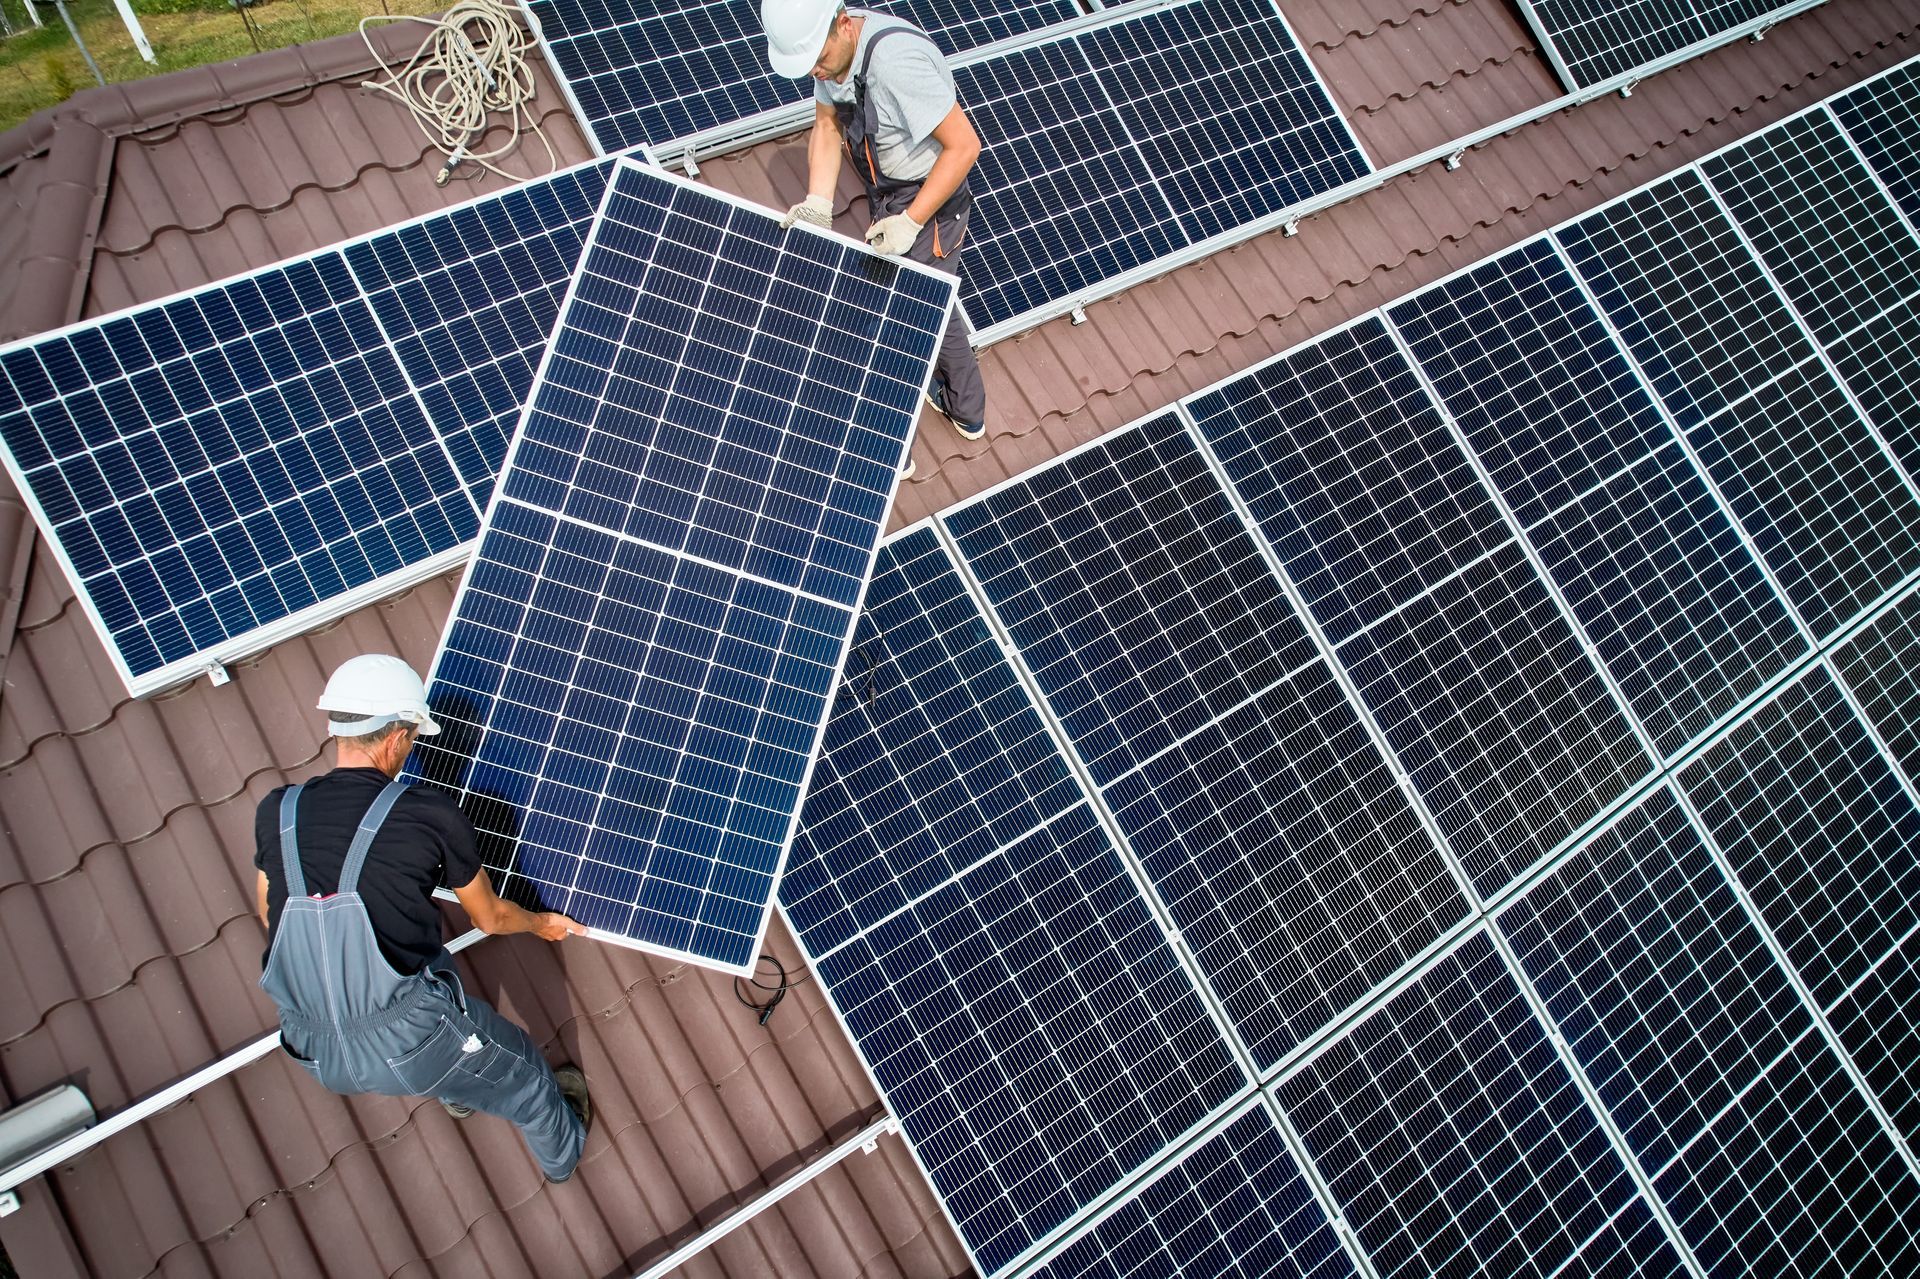 Two men are installing solar panels on the roof of a house.